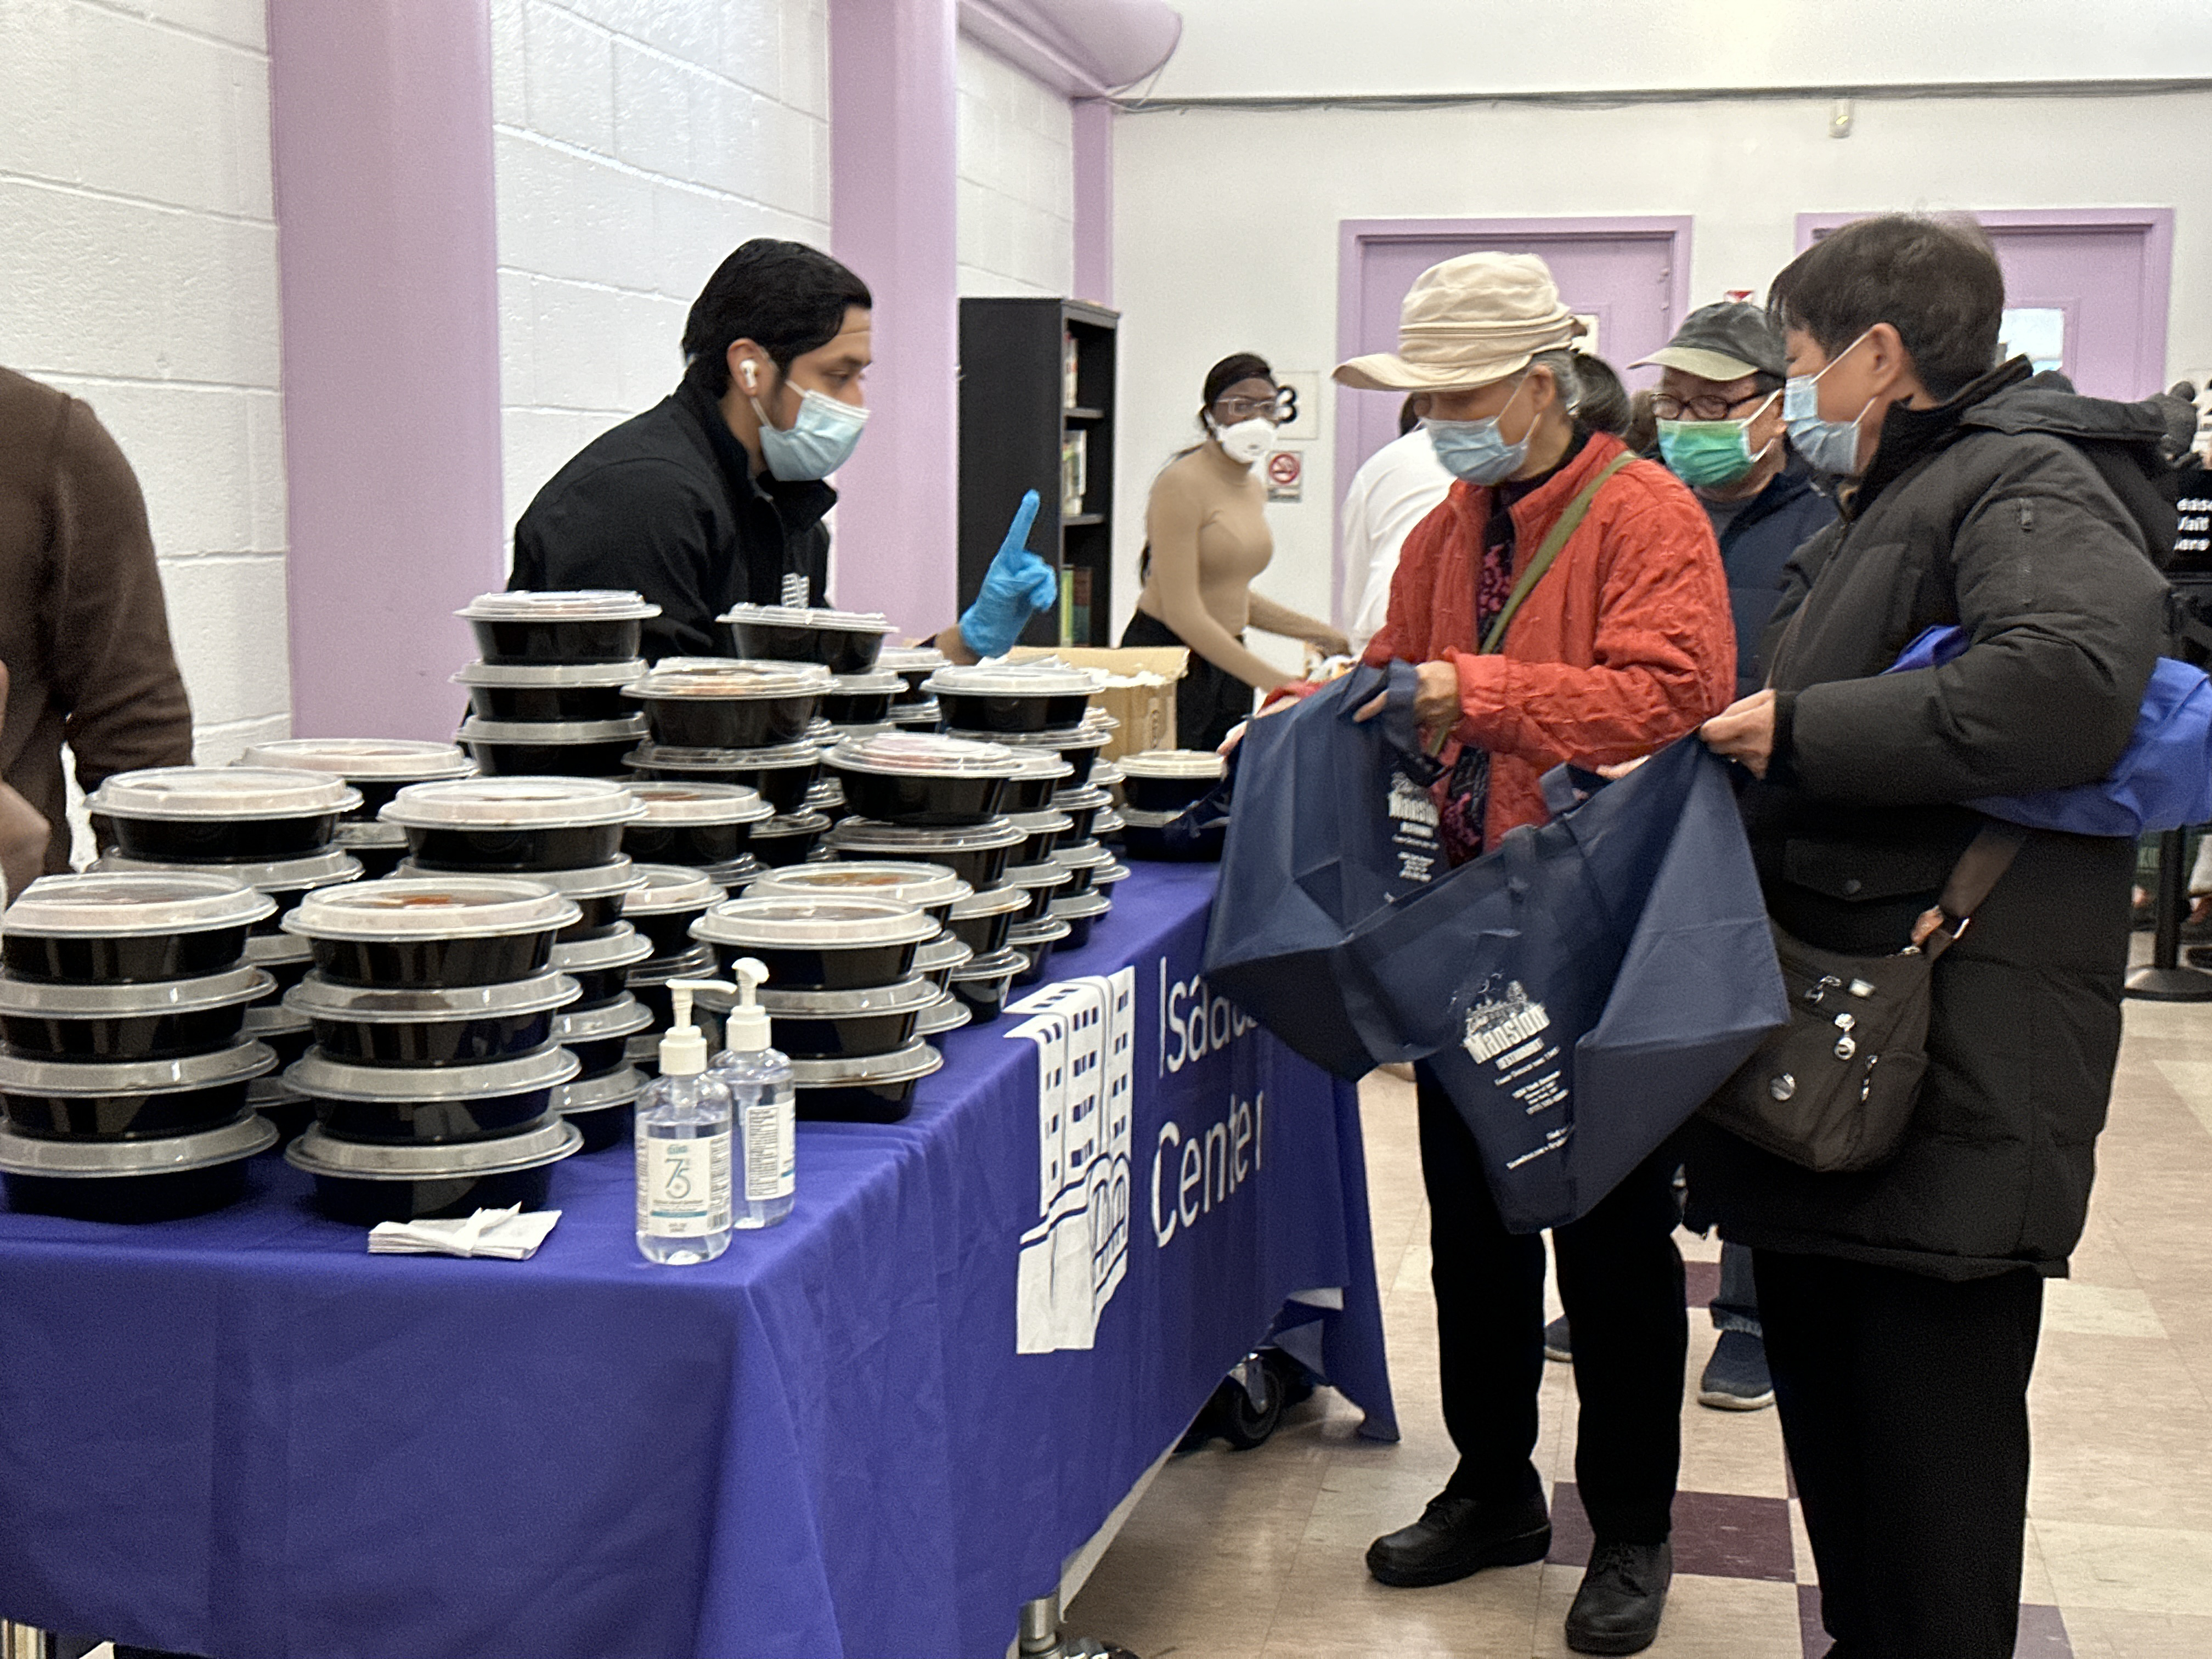 UES residents were told they could not take an extra meal to those who could not stay and wait | Upper East Site